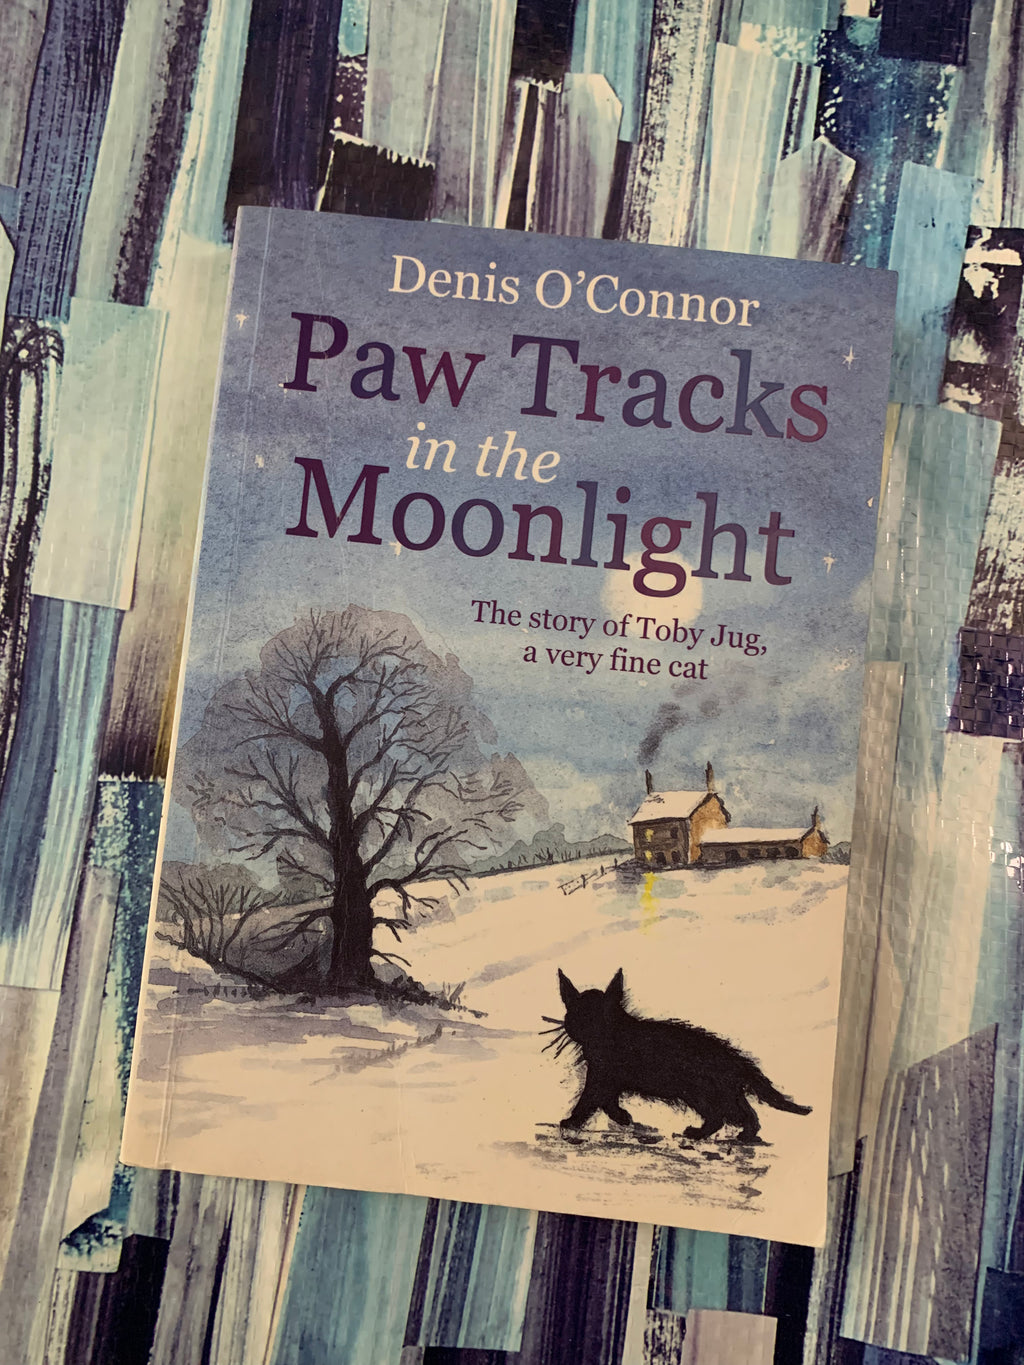 Paw Tracks in the Moonlight- By Denis O'Connor